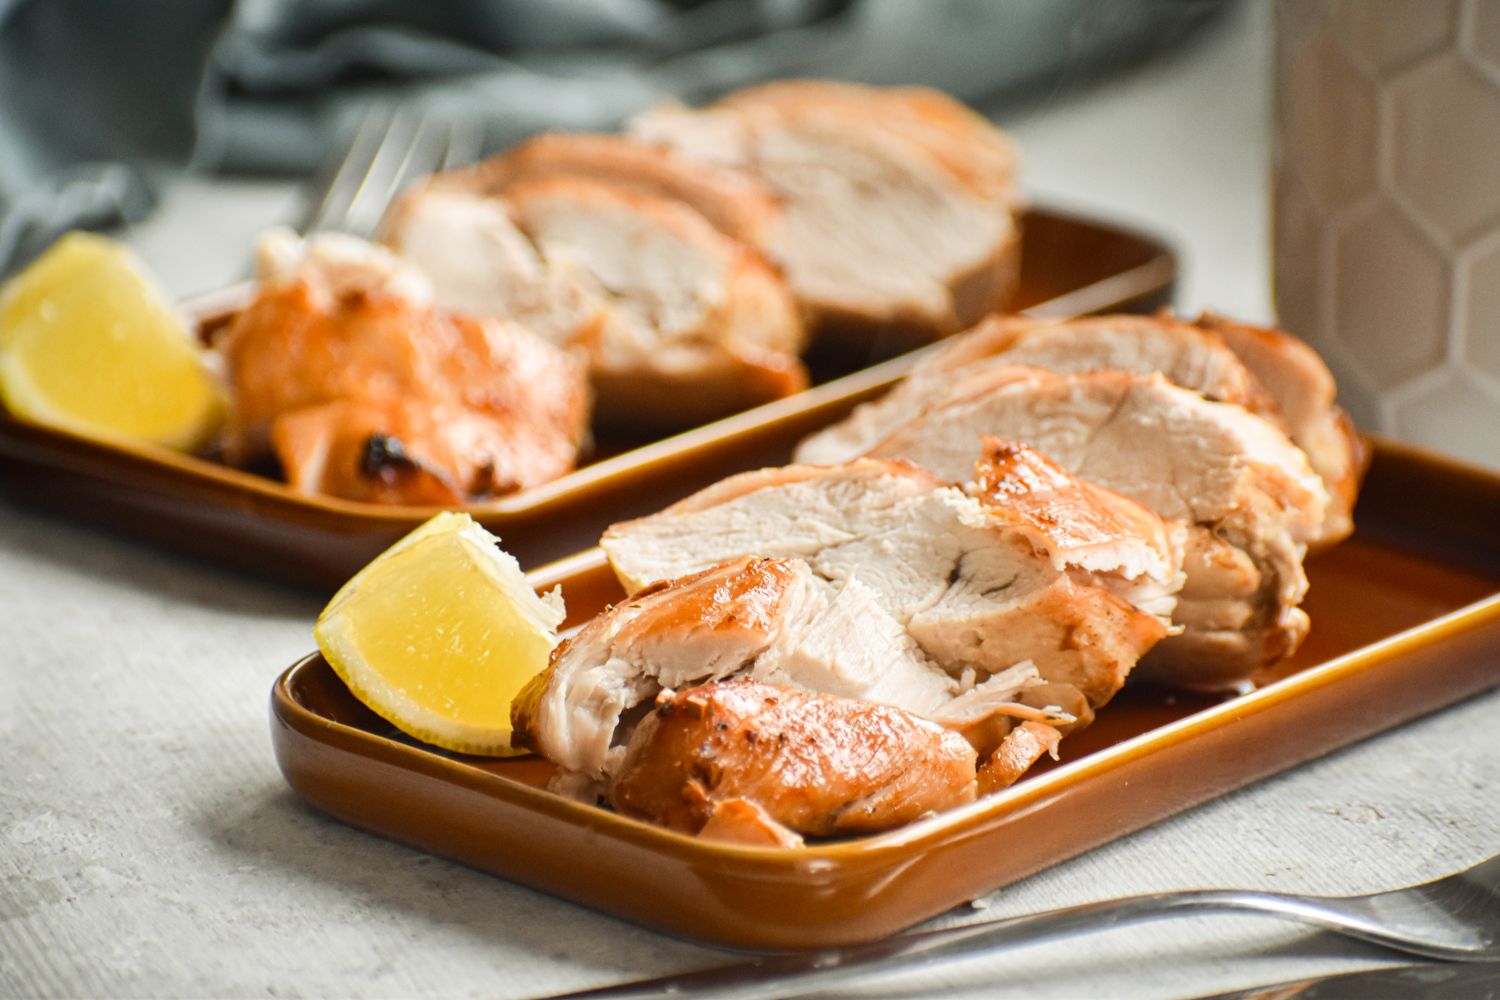 Chicken breasts with a brown sugar and garlic coating sliced on two plates.